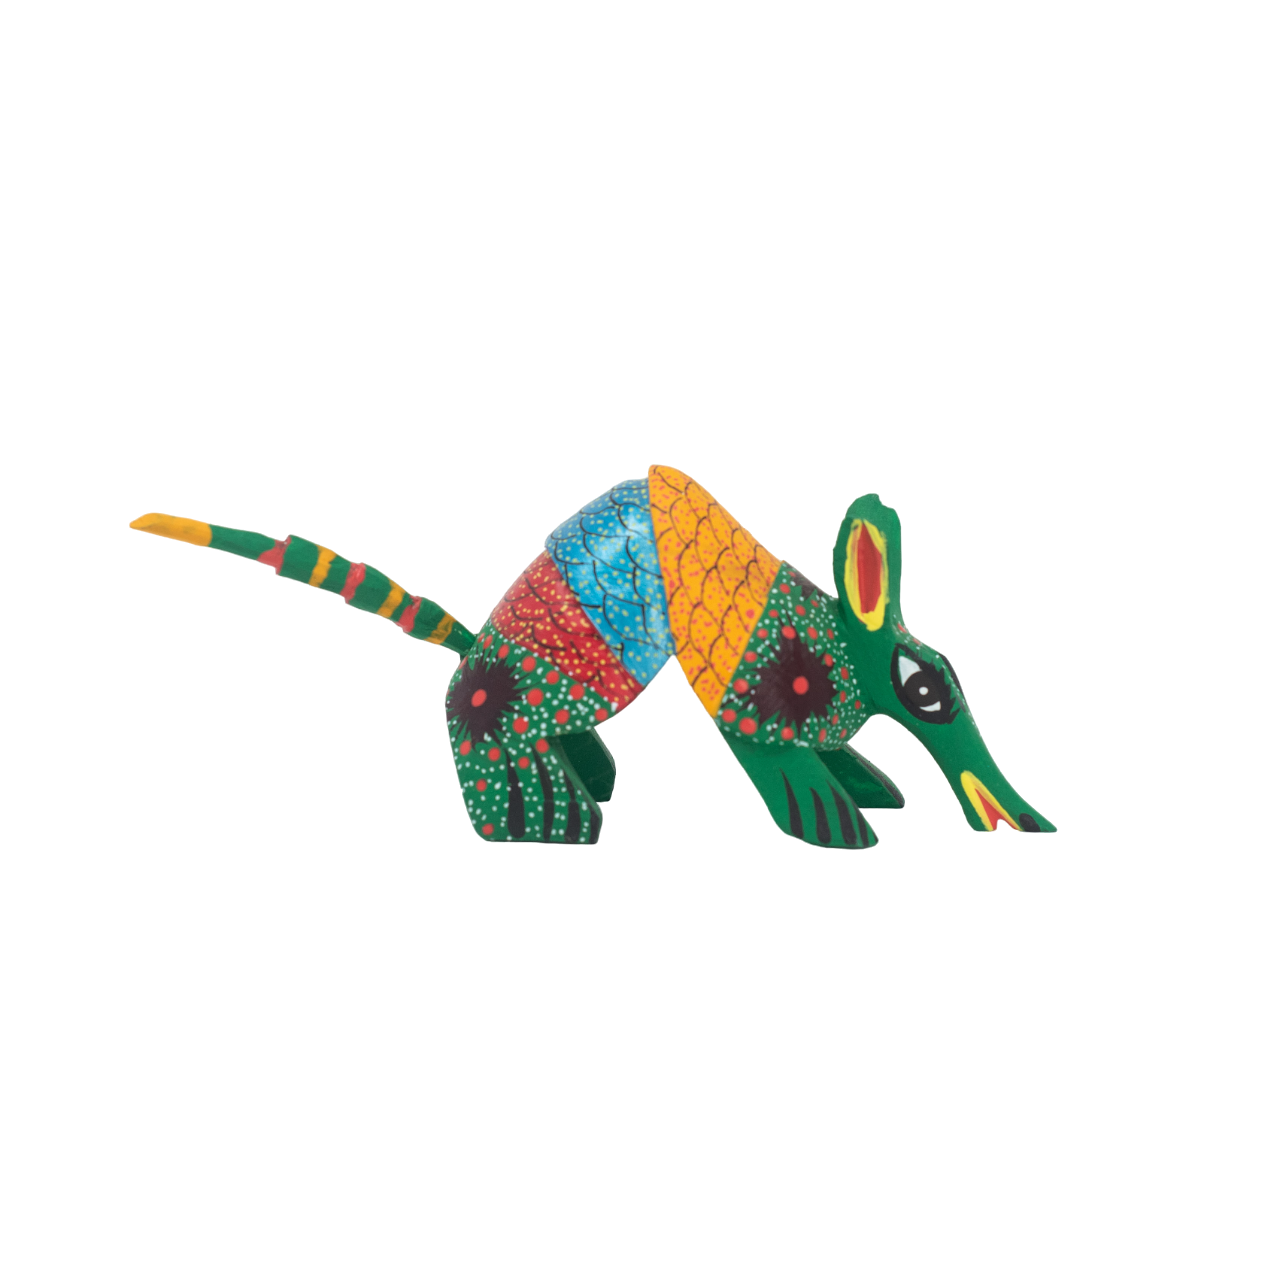 Colorful Armadillo, Handcarved Wooden Armadillo, Handcarved Colorful Armadillo 